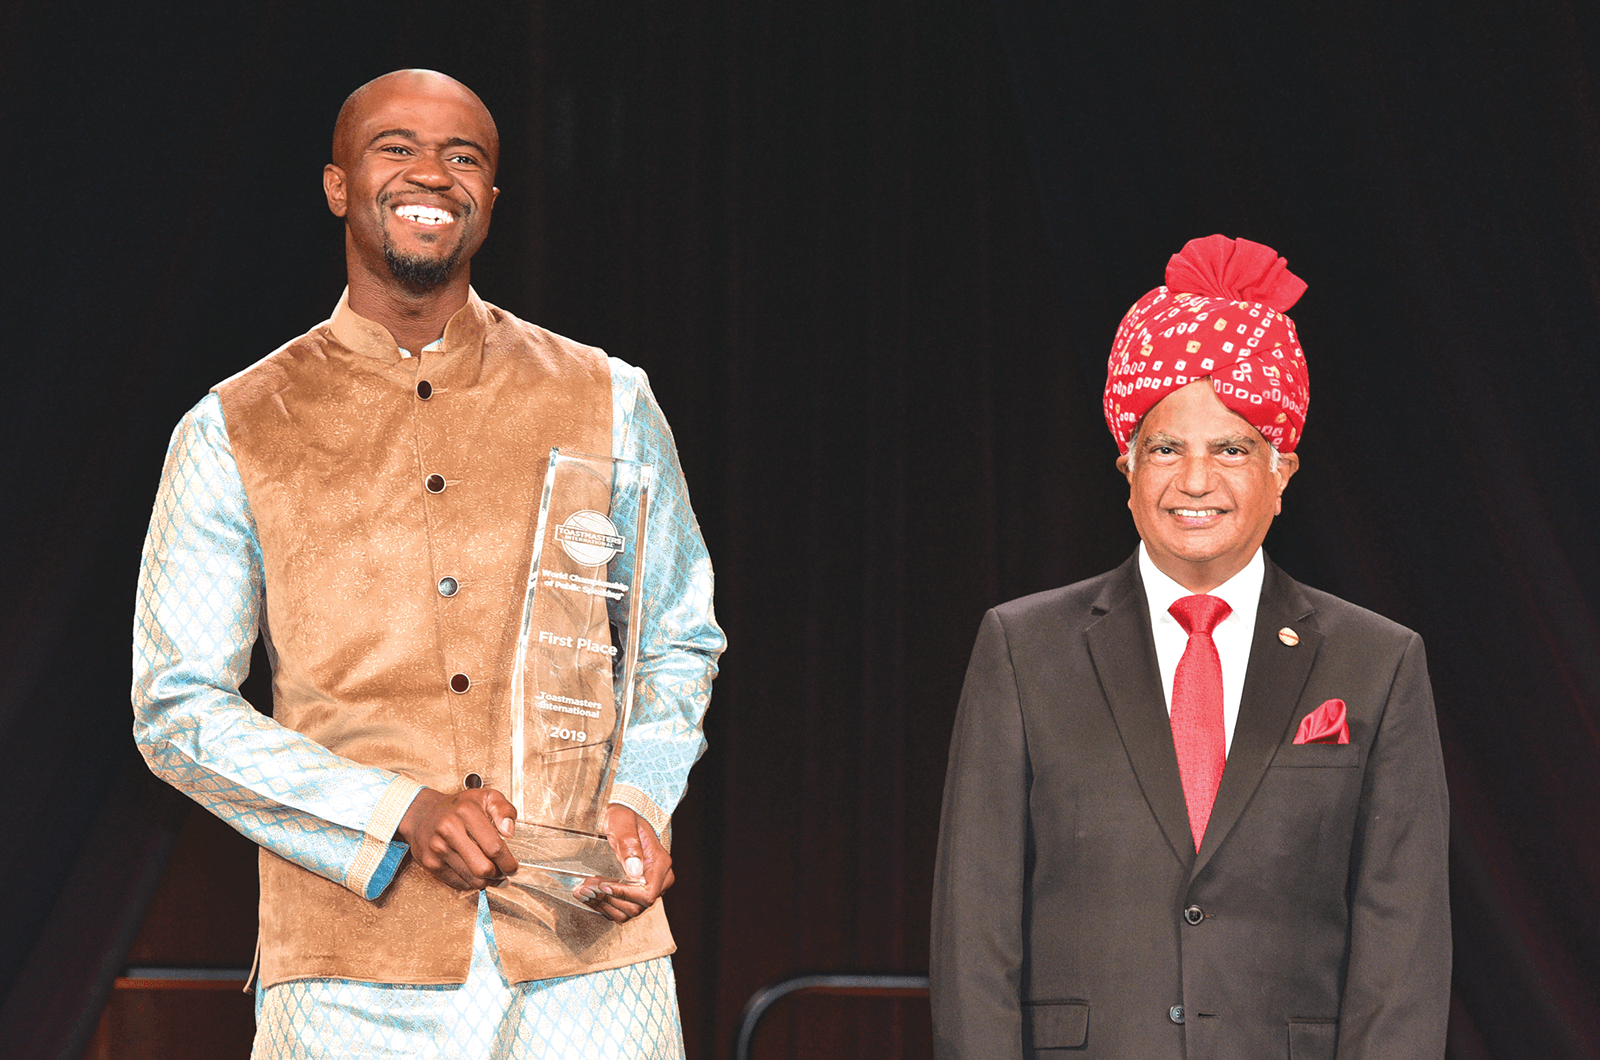 Beverly reacts happily after being announced by International President Deepak Menon (right) as the 2019 World Champion of Public Speaking.